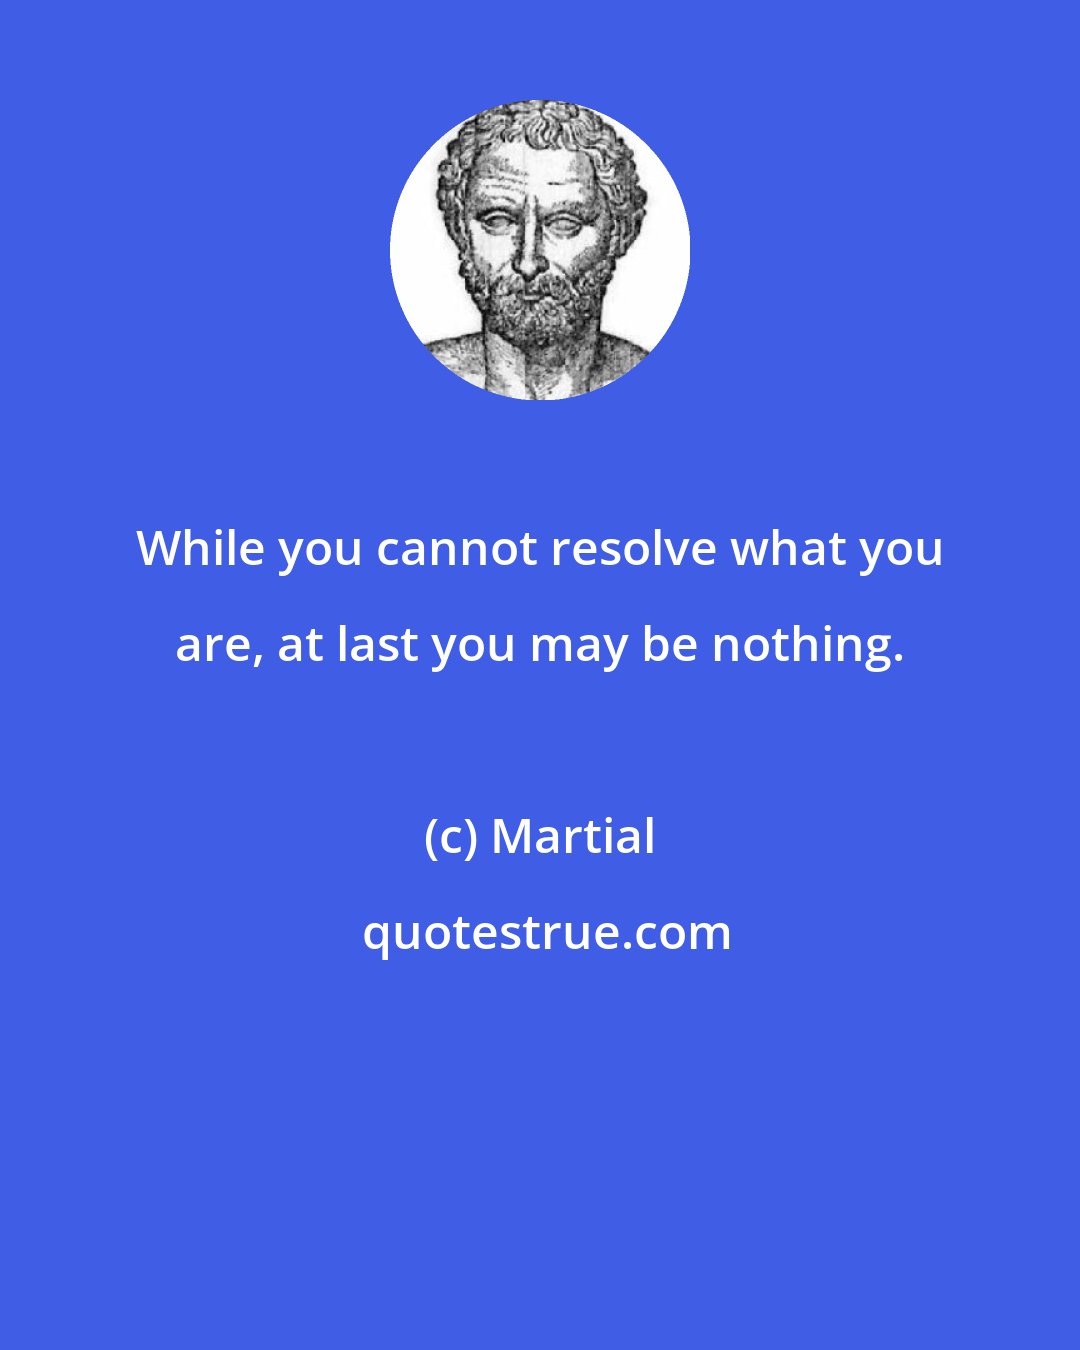 Martial: While you cannot resolve what you are, at last you may be nothing.